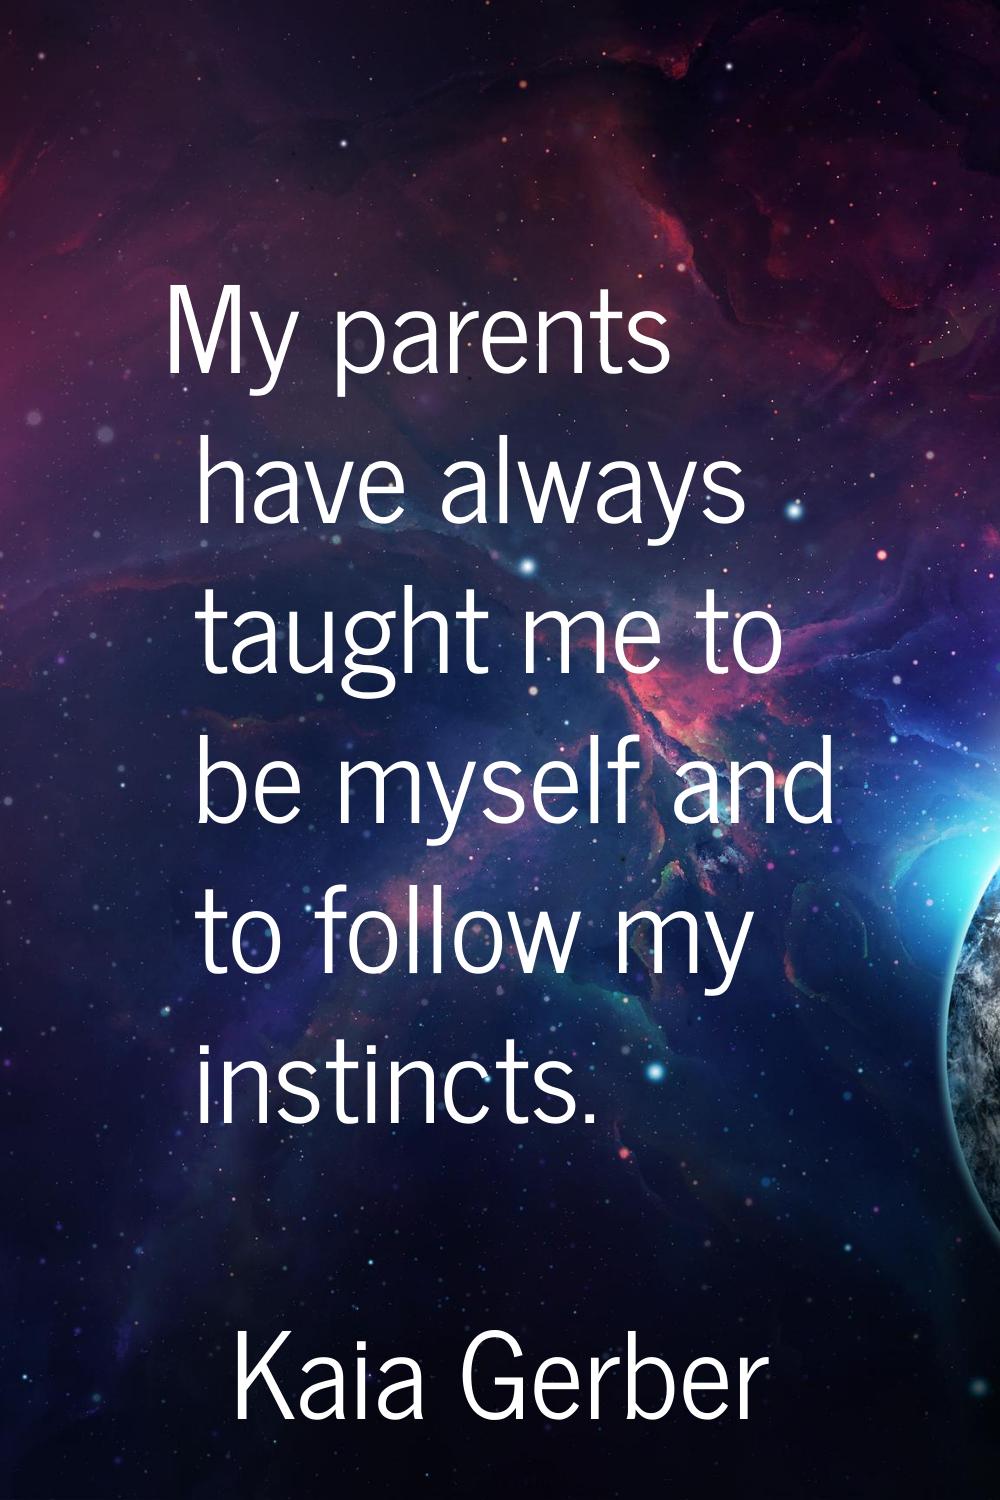 My parents have always taught me to be myself and to follow my instincts.